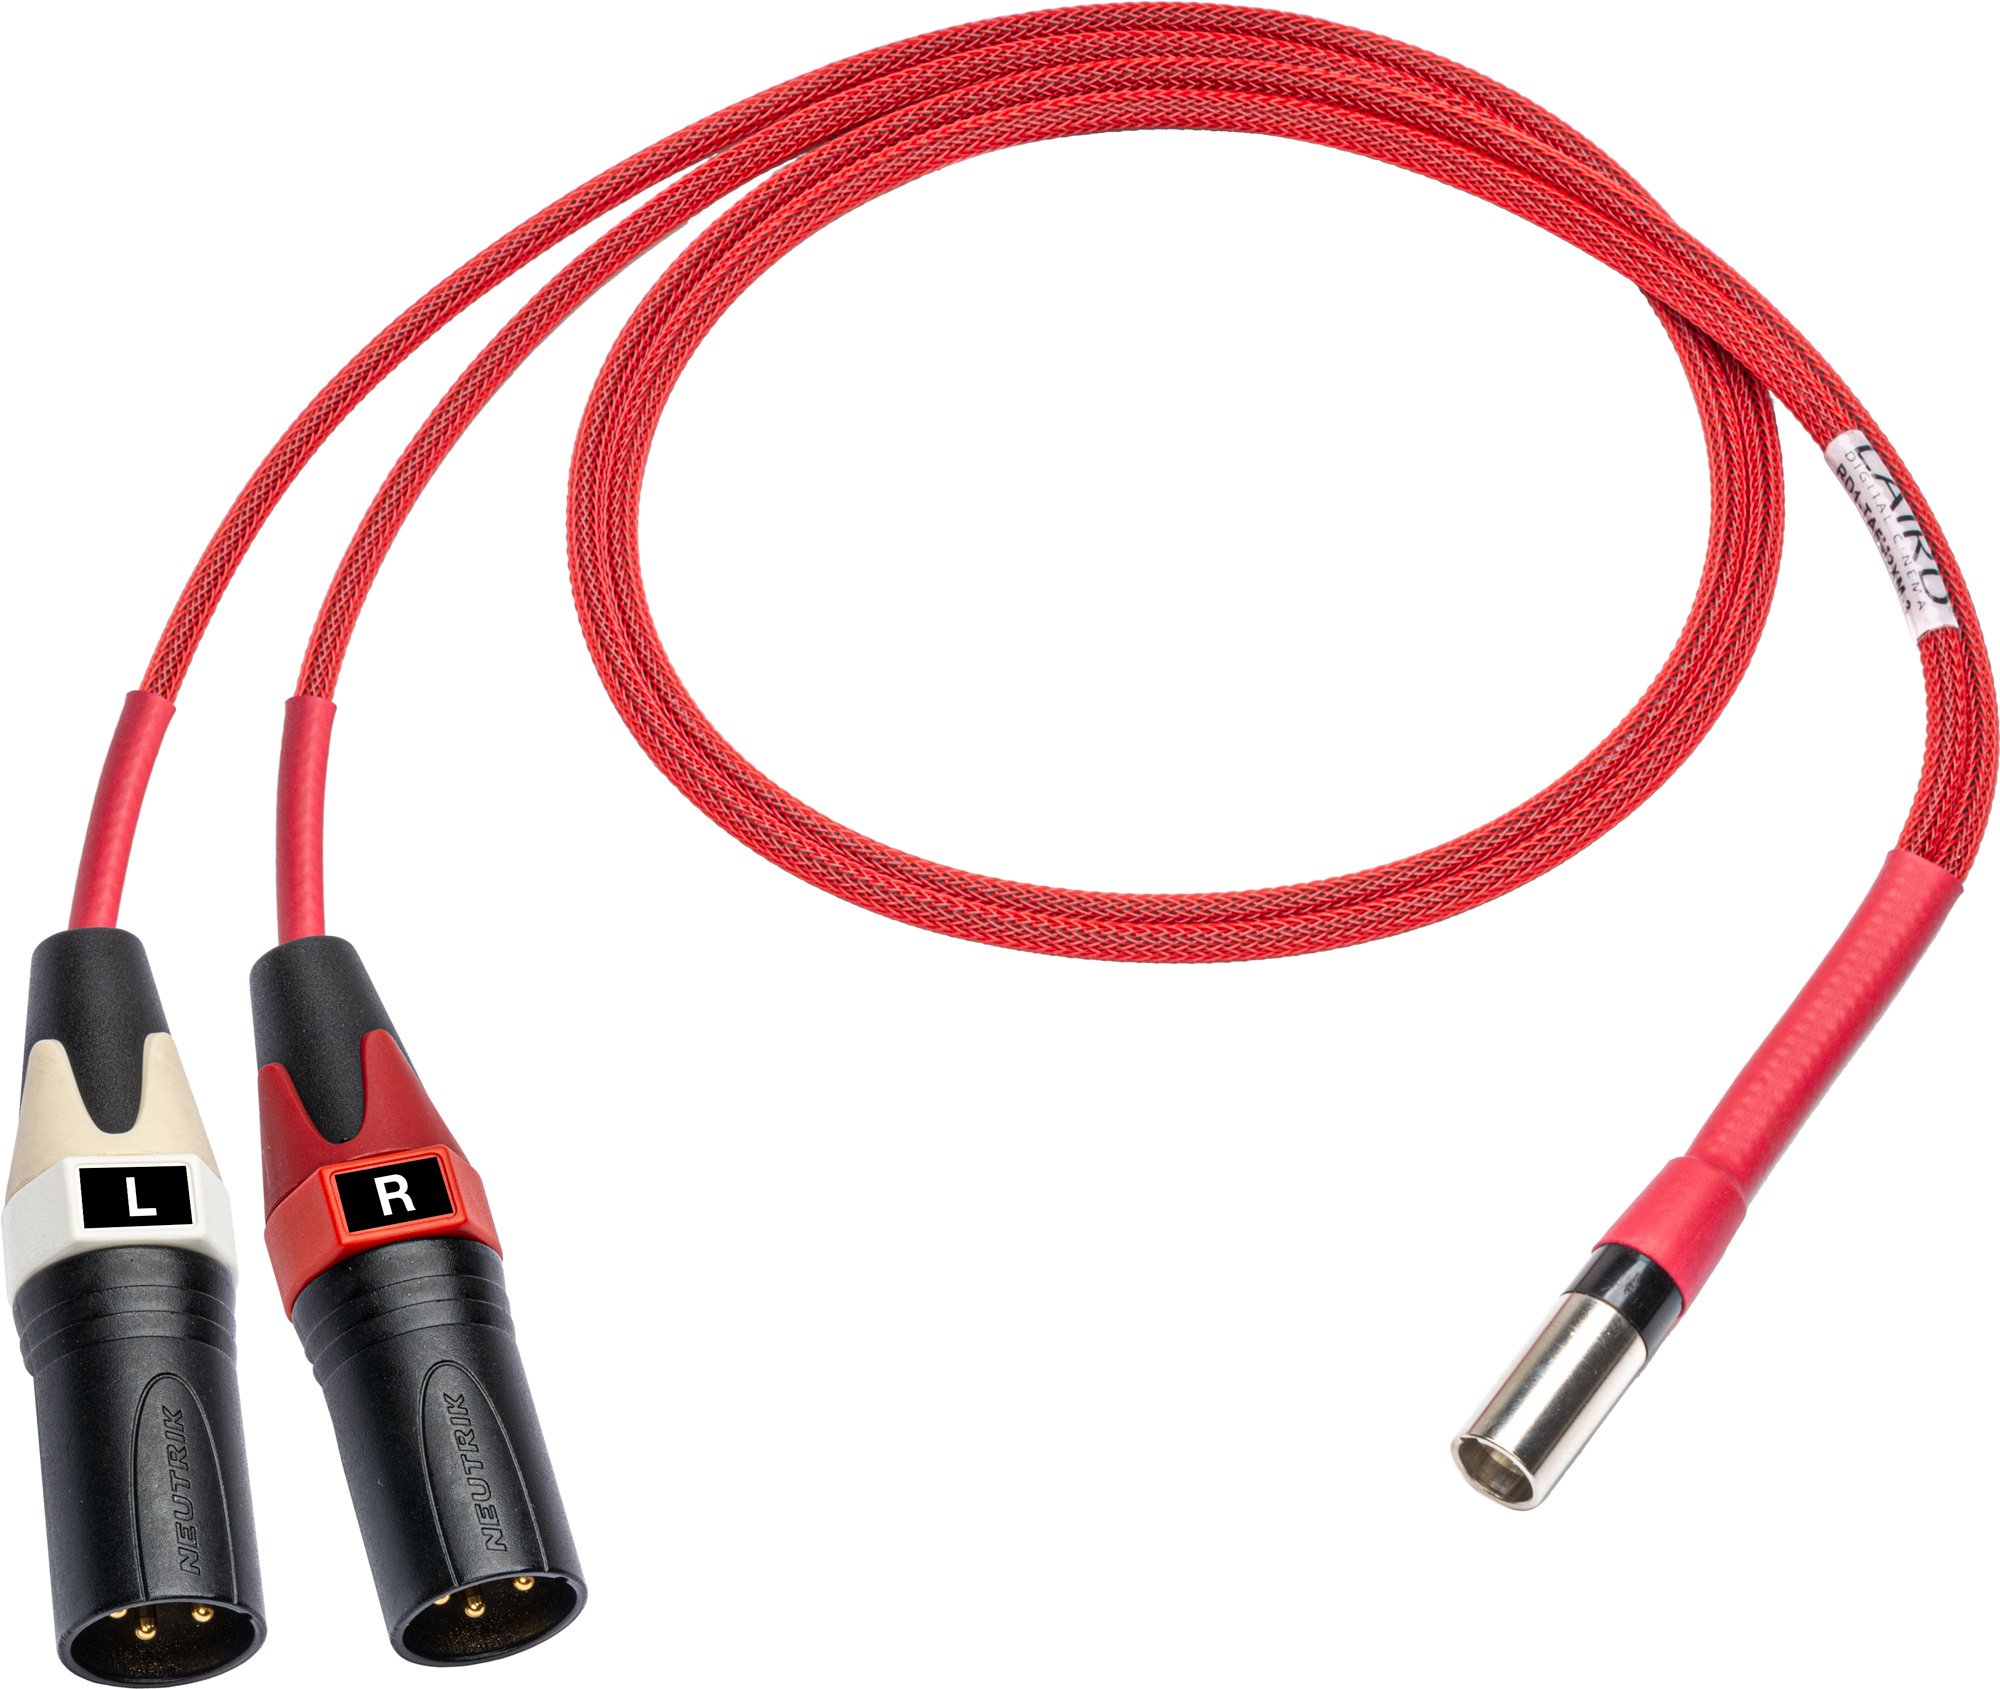 Red Camera Audio Cables